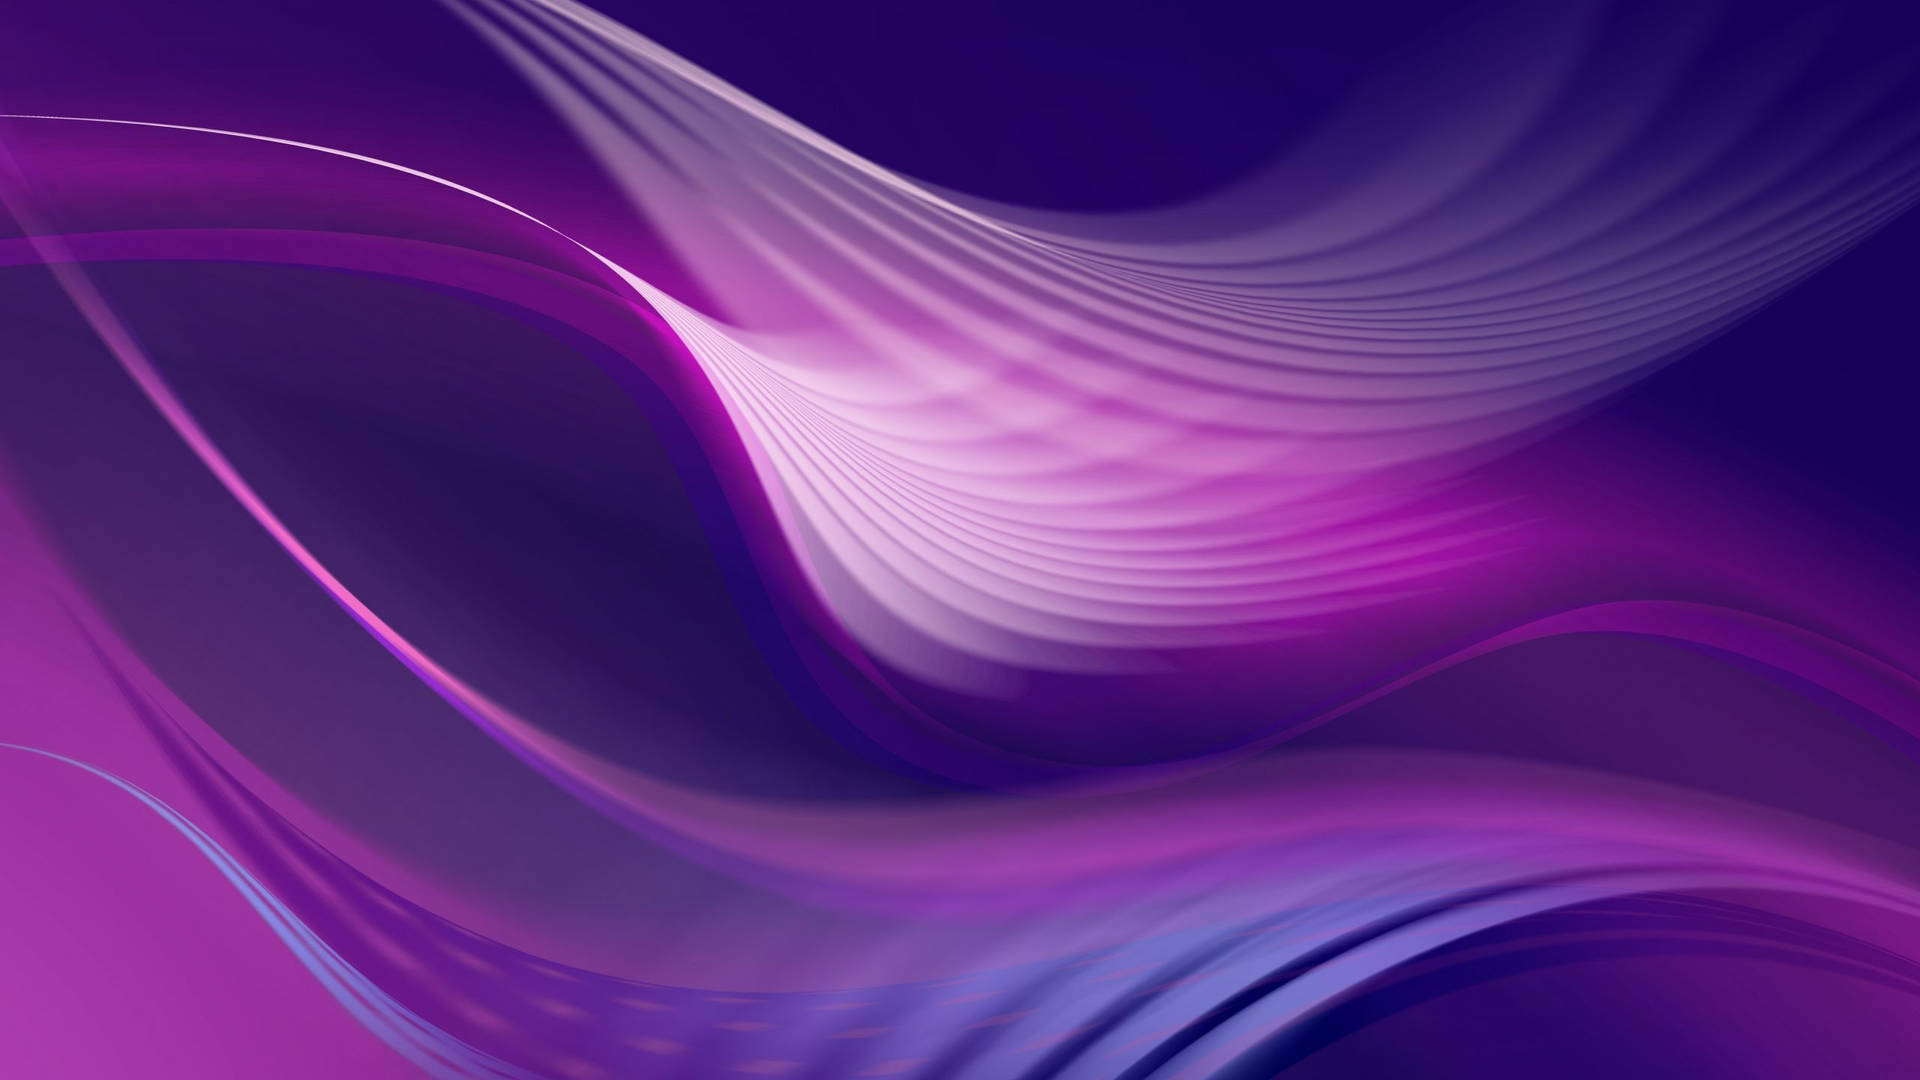 Violet Aesthetic Close-up Abstract Art Background